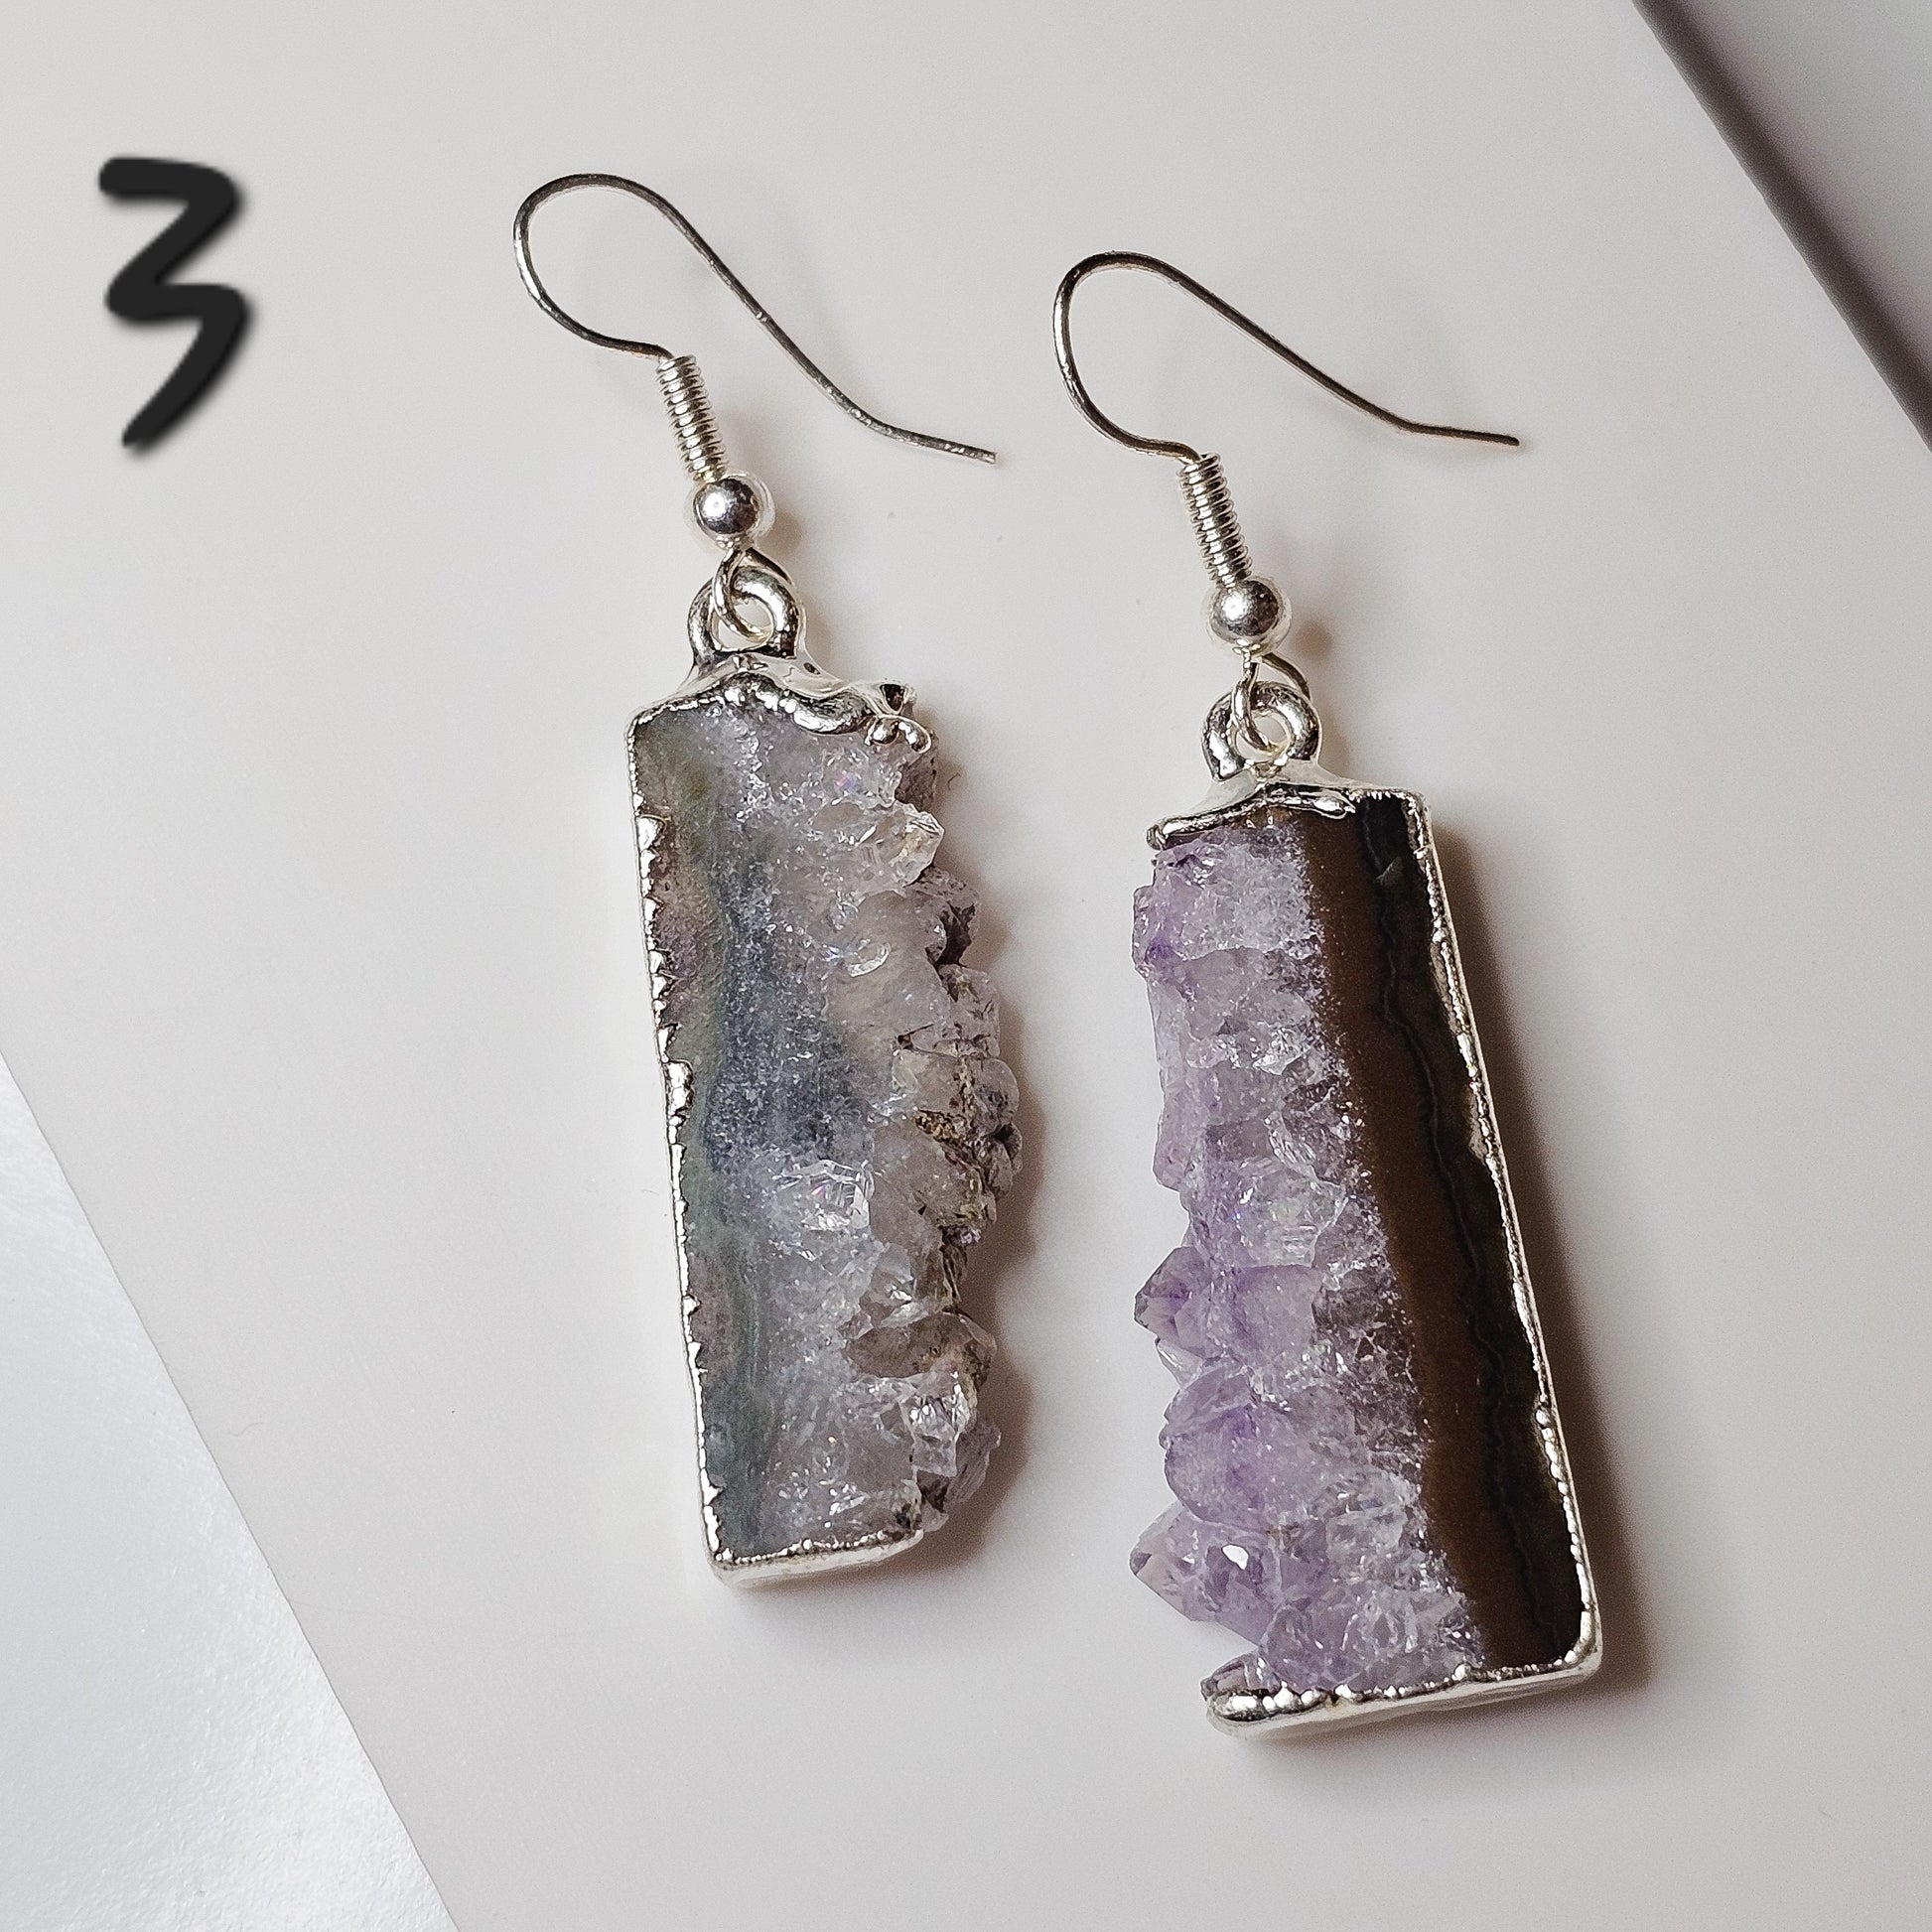 Brazilian Amethyst Stalactite silver plated earrings with hypo-allergenic ear wires.